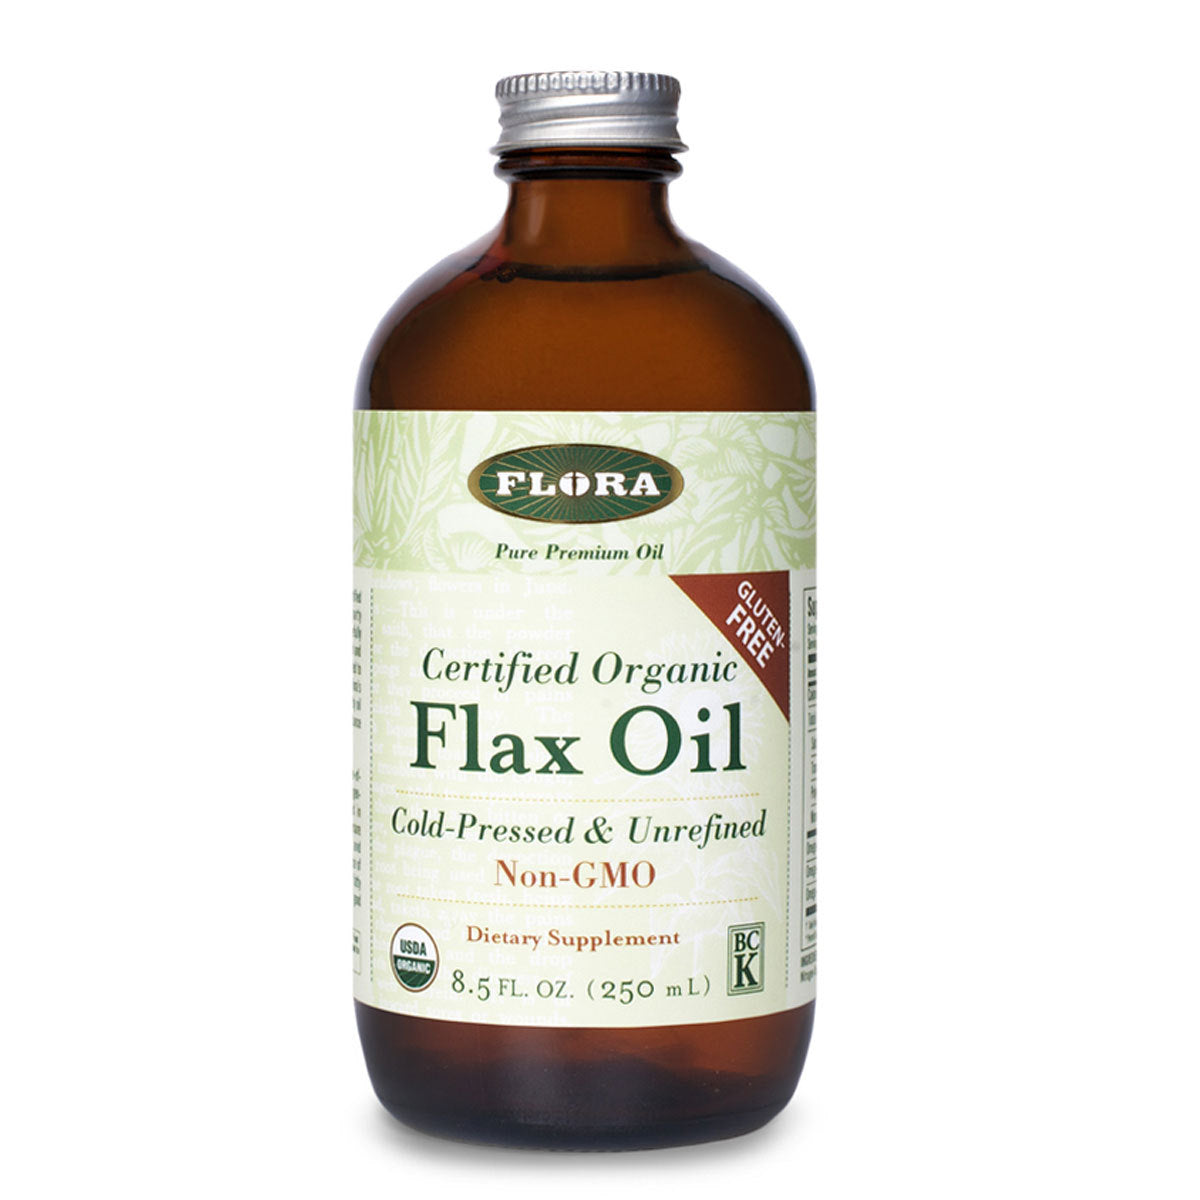 Primary image of Certified Organic Flax Oil